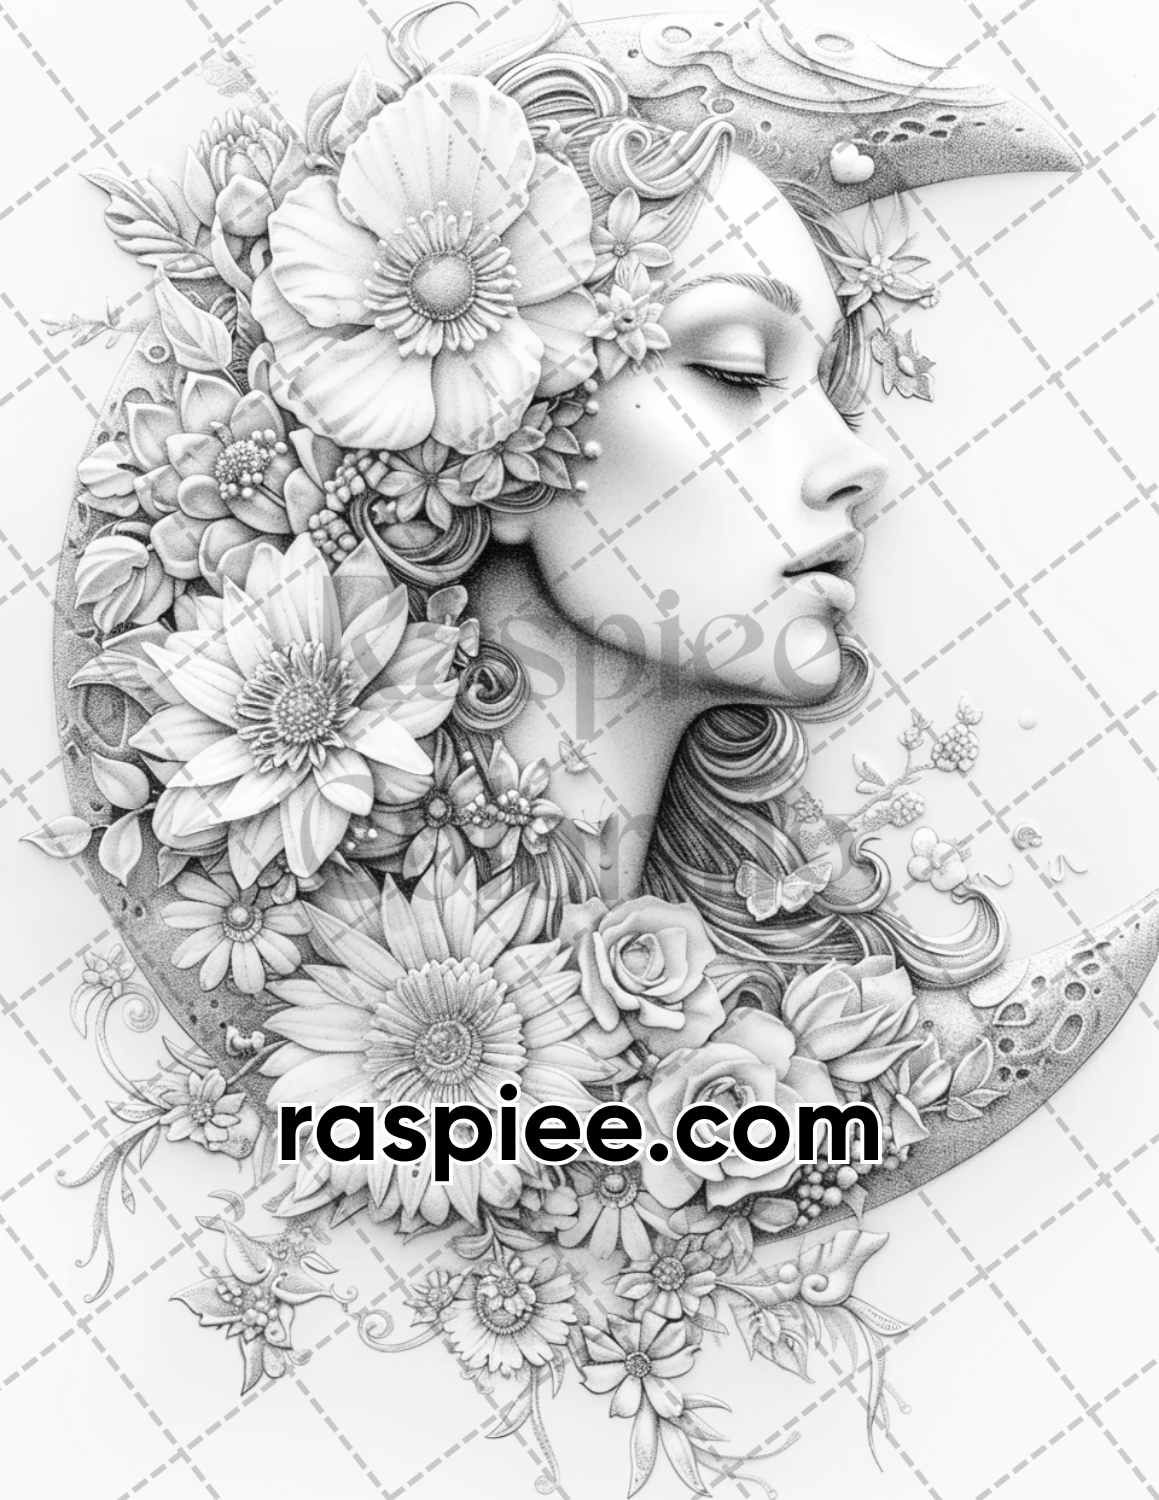 adult coloring pages, adult coloring sheets, adult coloring book pdf, adult coloring book printable, grayscale coloring pages, grayscale coloring books, grayscale illustration, boho moon floral adult coloring pages, boho moon floral coloring book